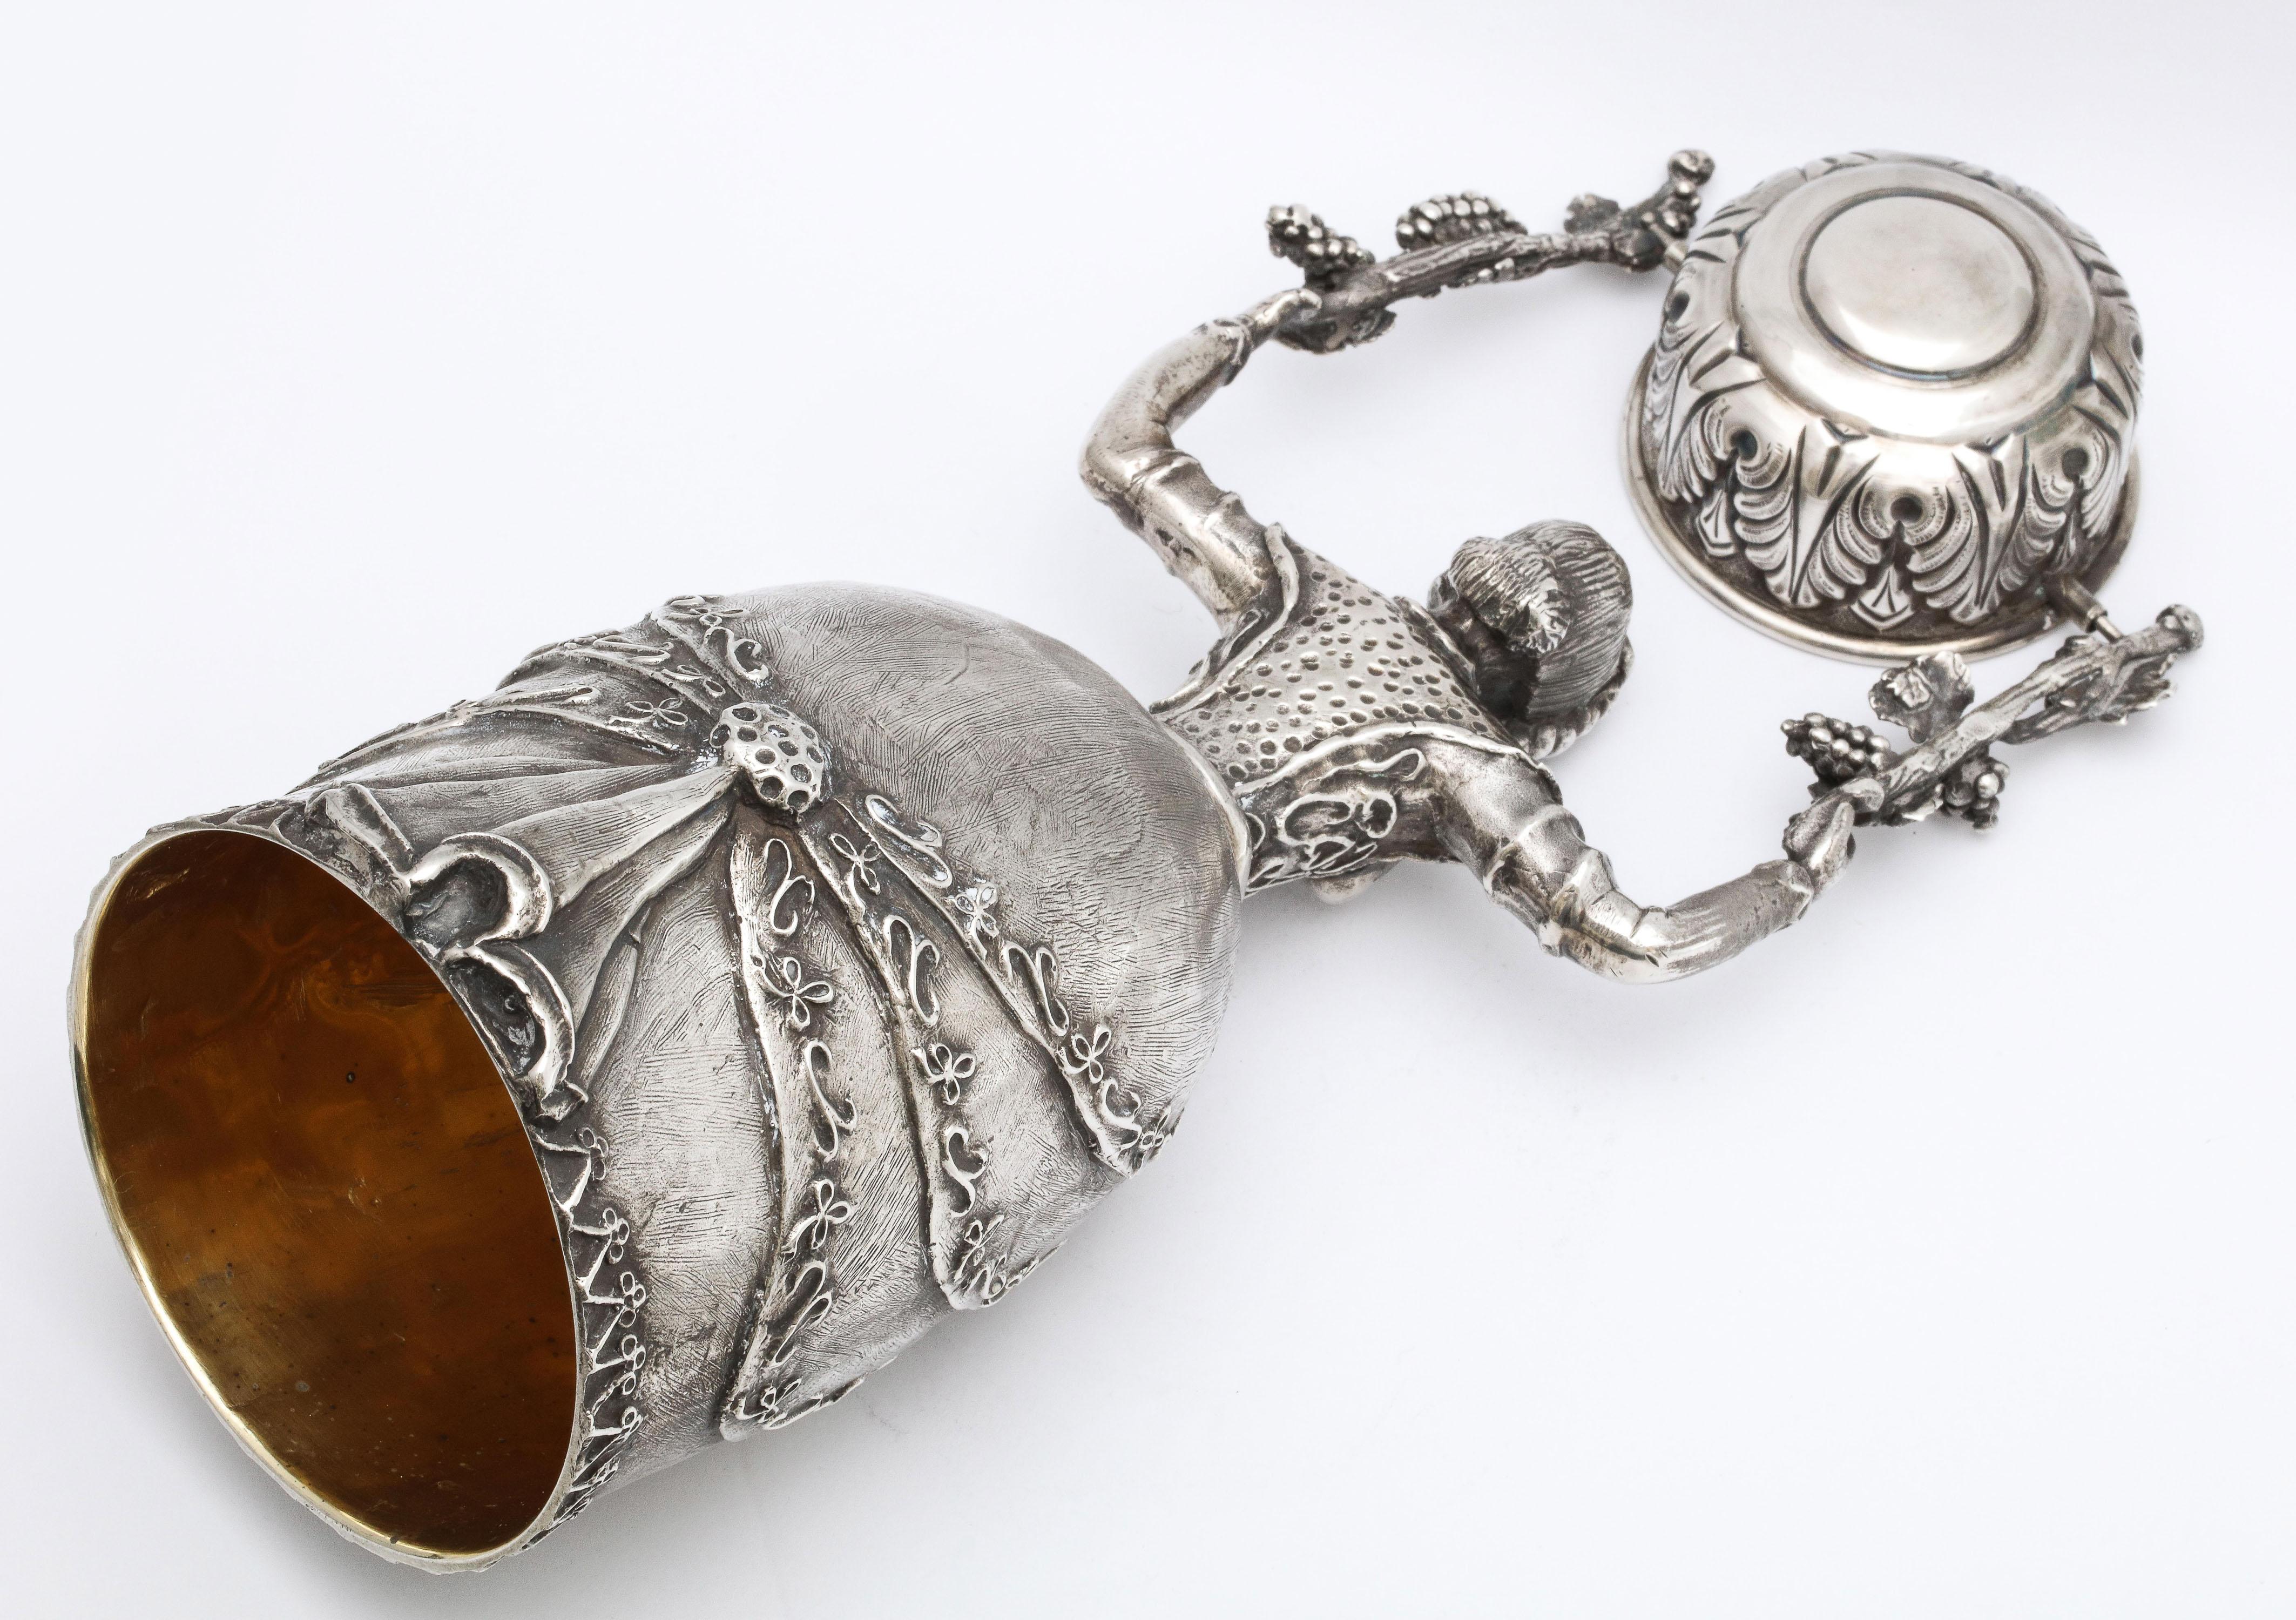 Large 17th Century-Style Sterling Silver Wager/Marriage Cup 12